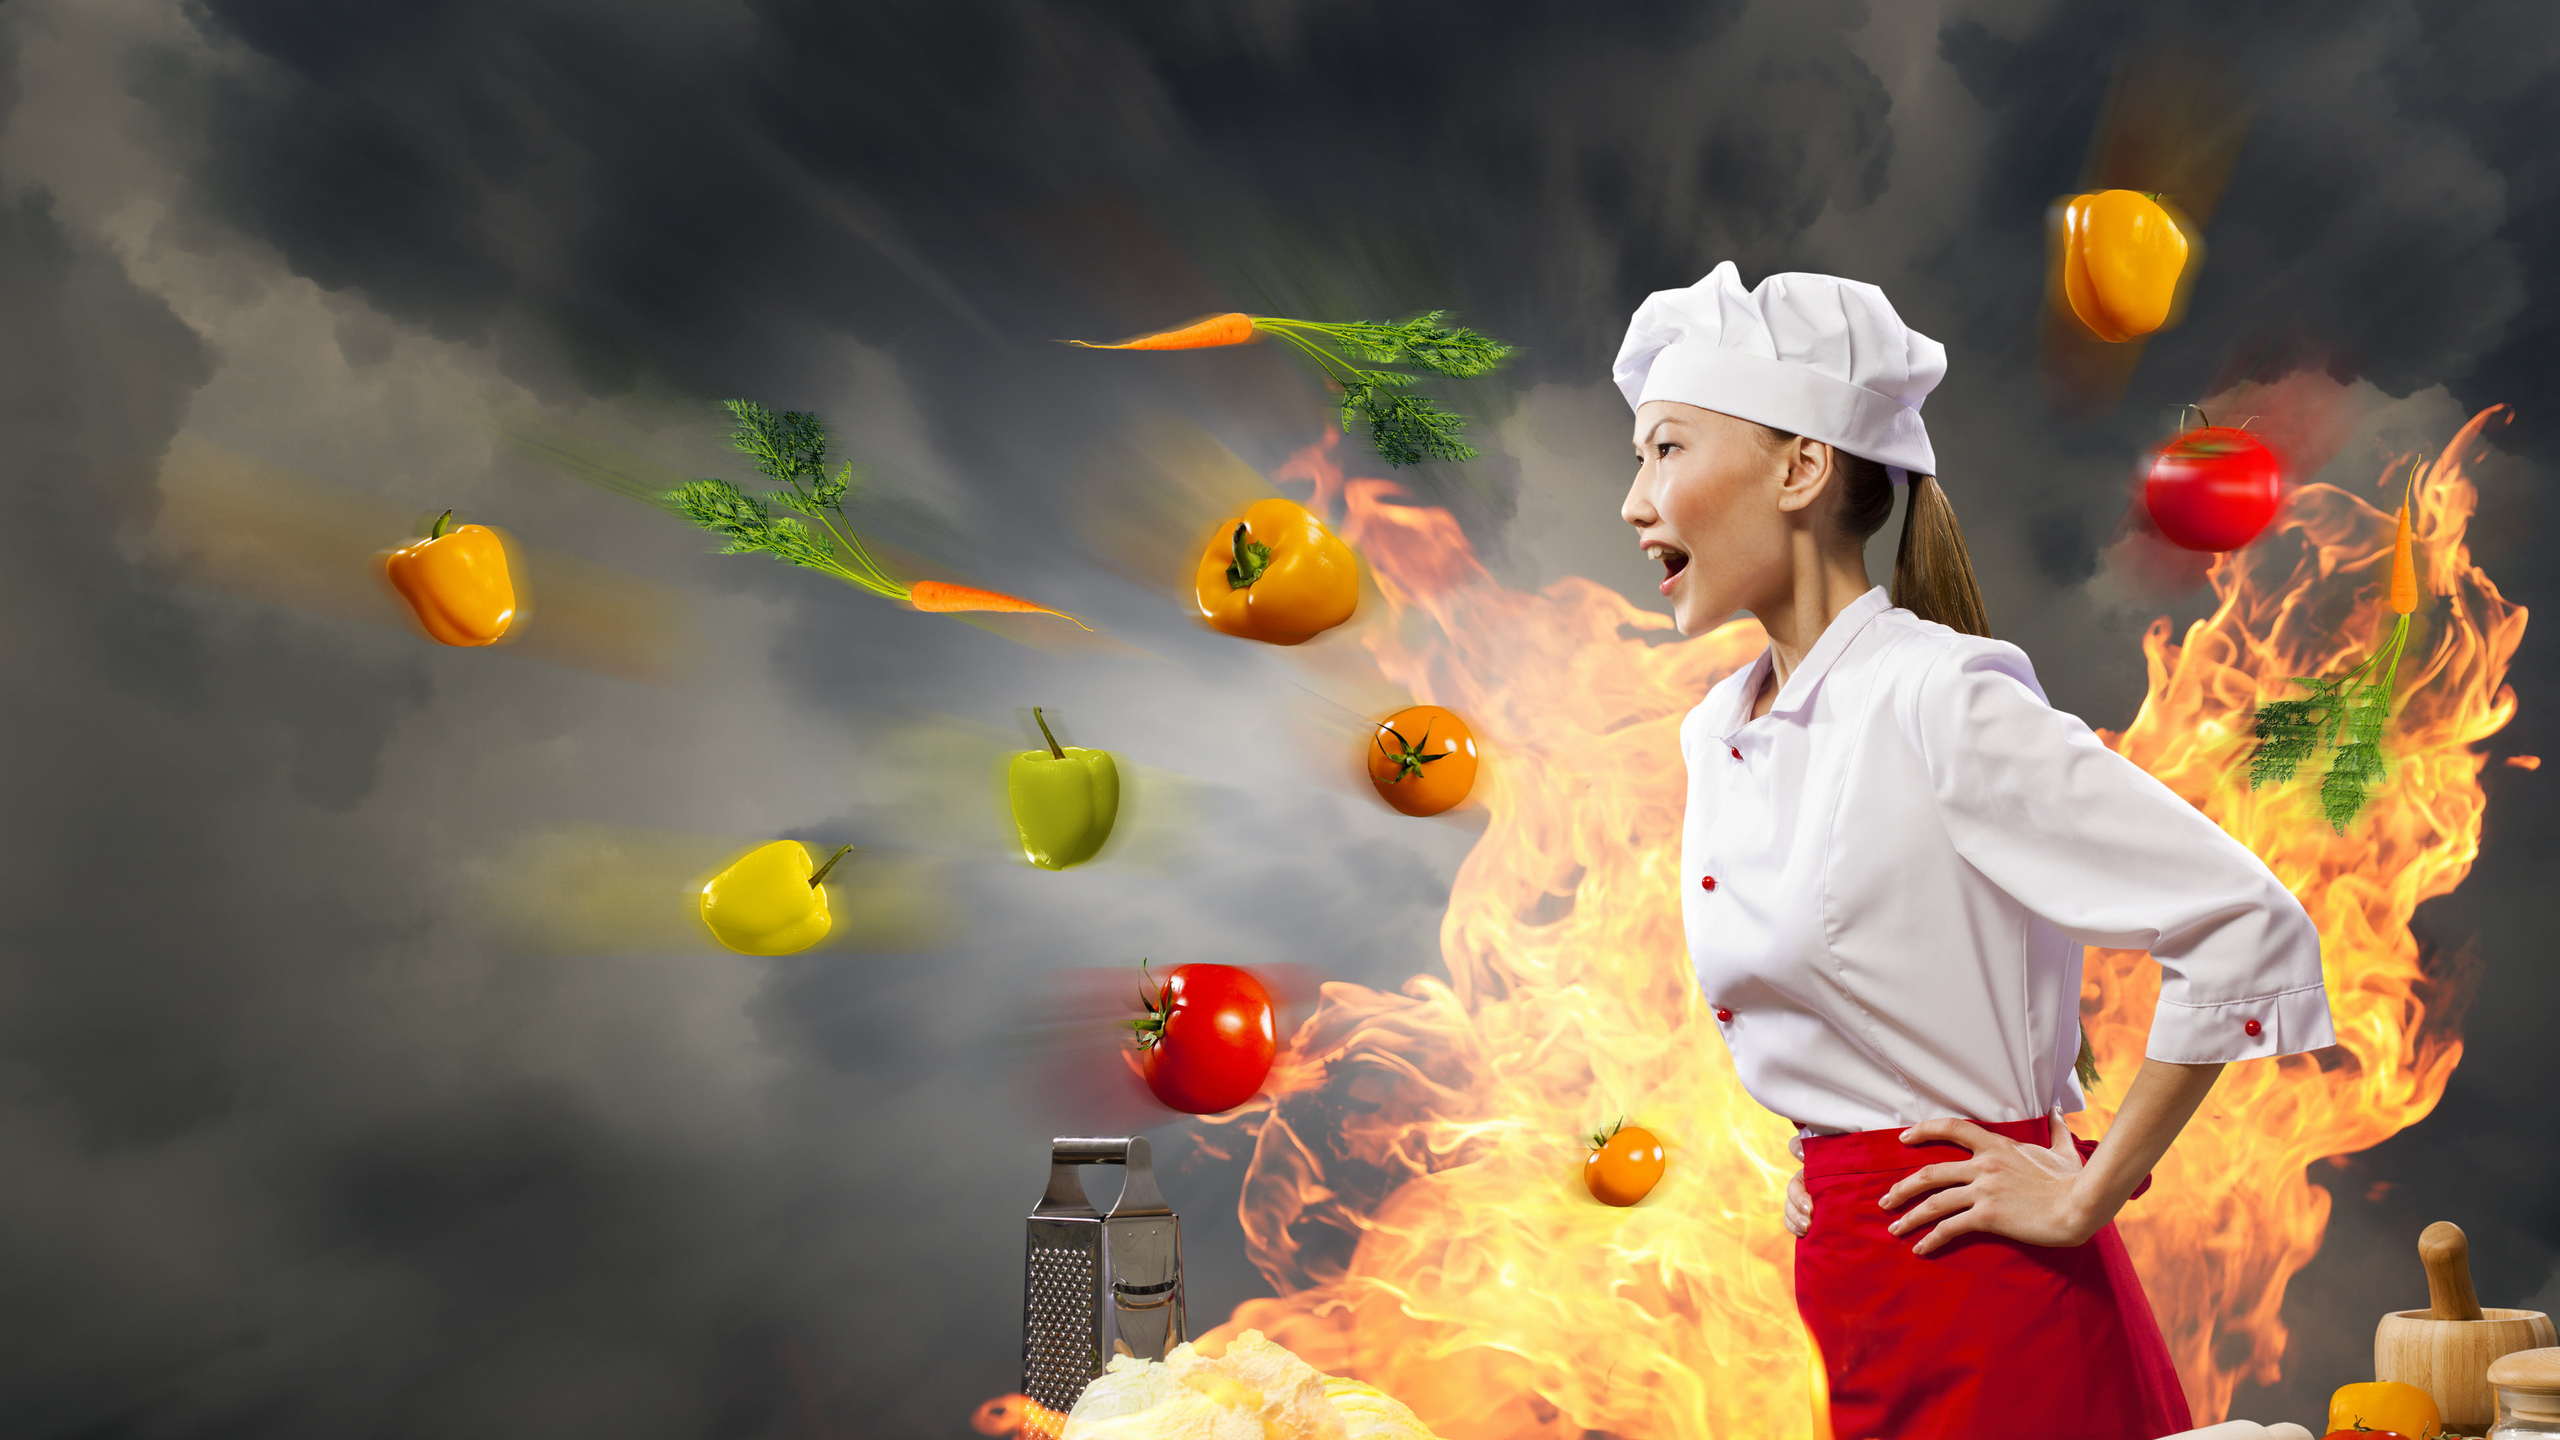 chef wallpaper hd,cook,photography,plant,fruit